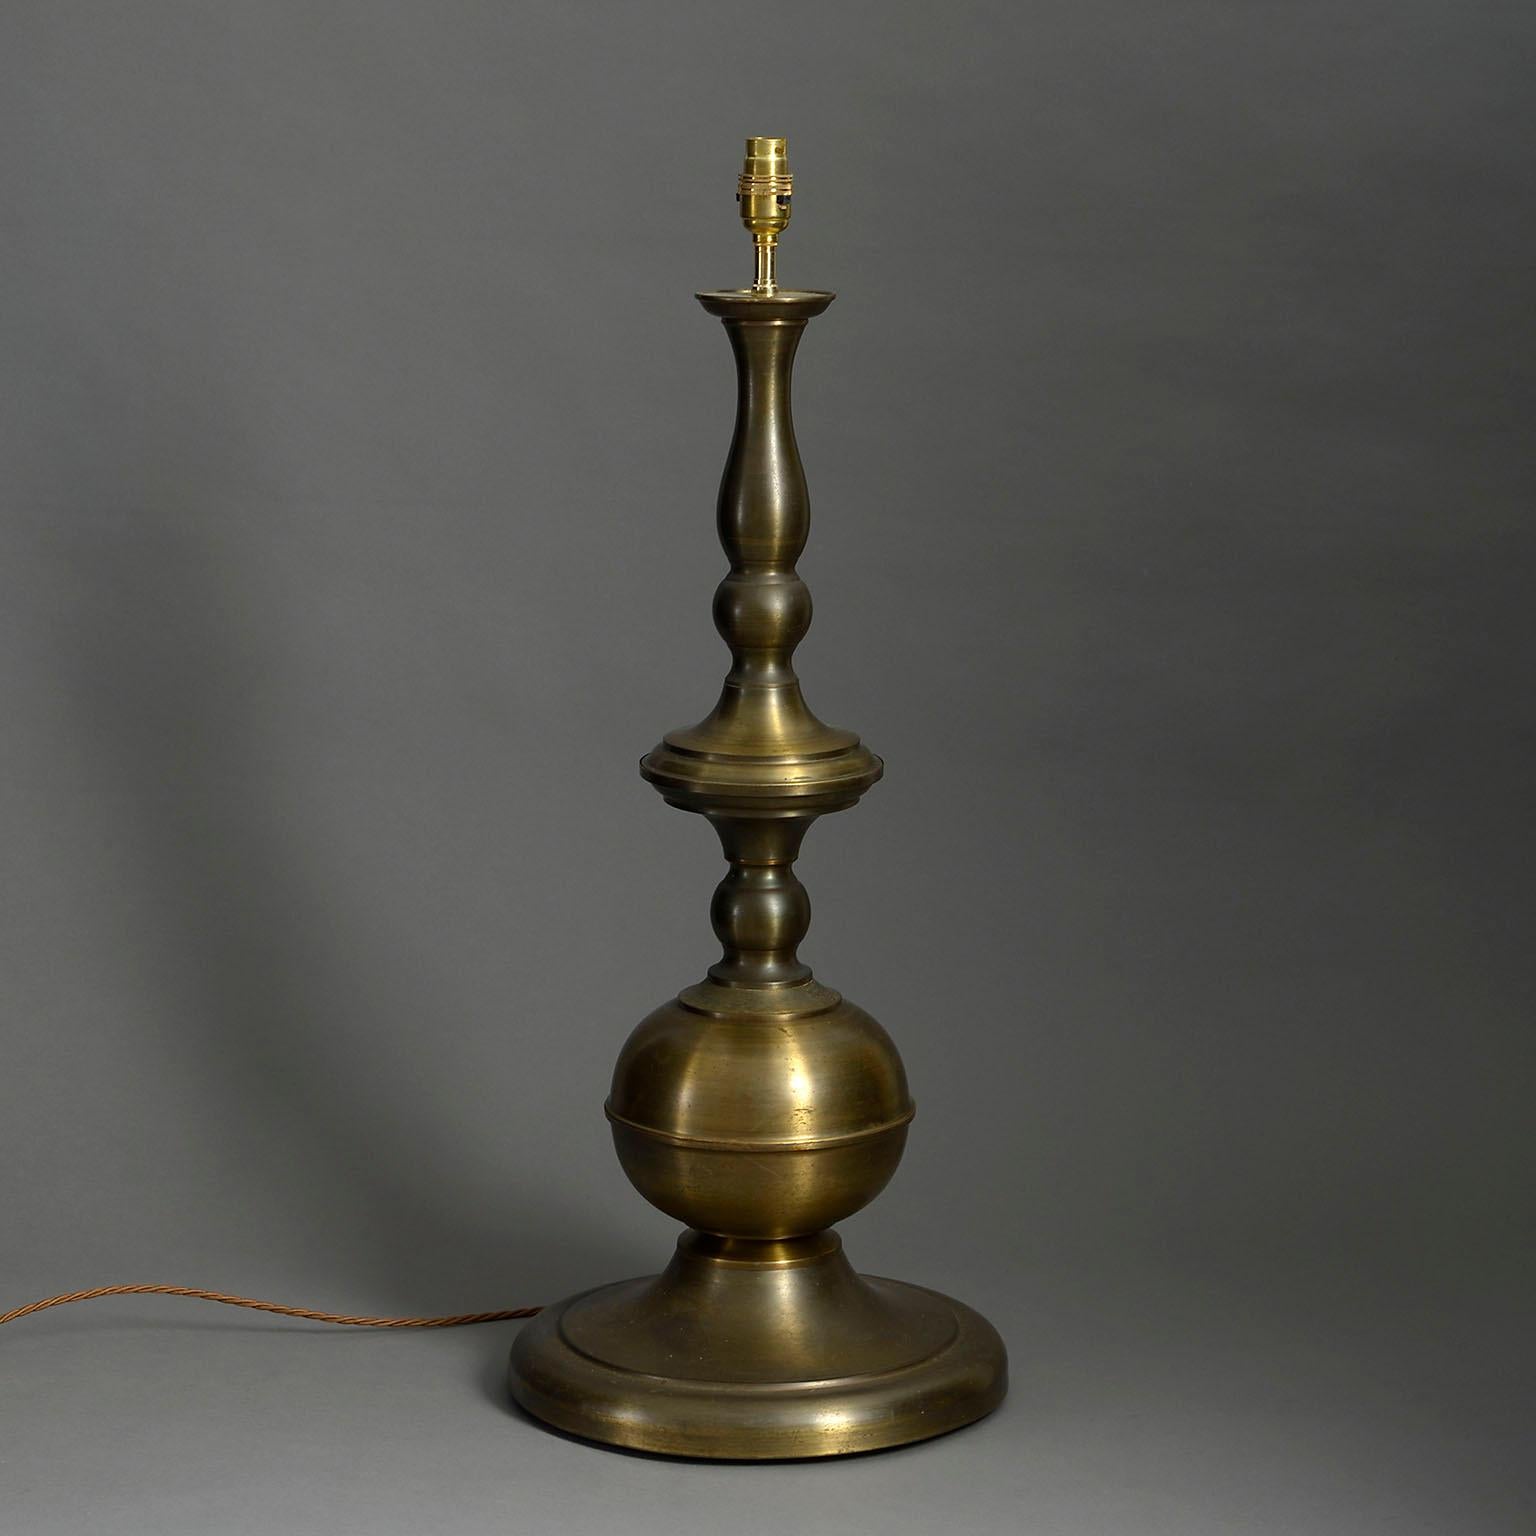 A mid-twenteith century turned brass lamp base of great scale and soft patination.

Dimensions refer to brass base and exclude electrical fittings.

Wired to UK standards. This lamp can be rewired to all international specifications inclusive of